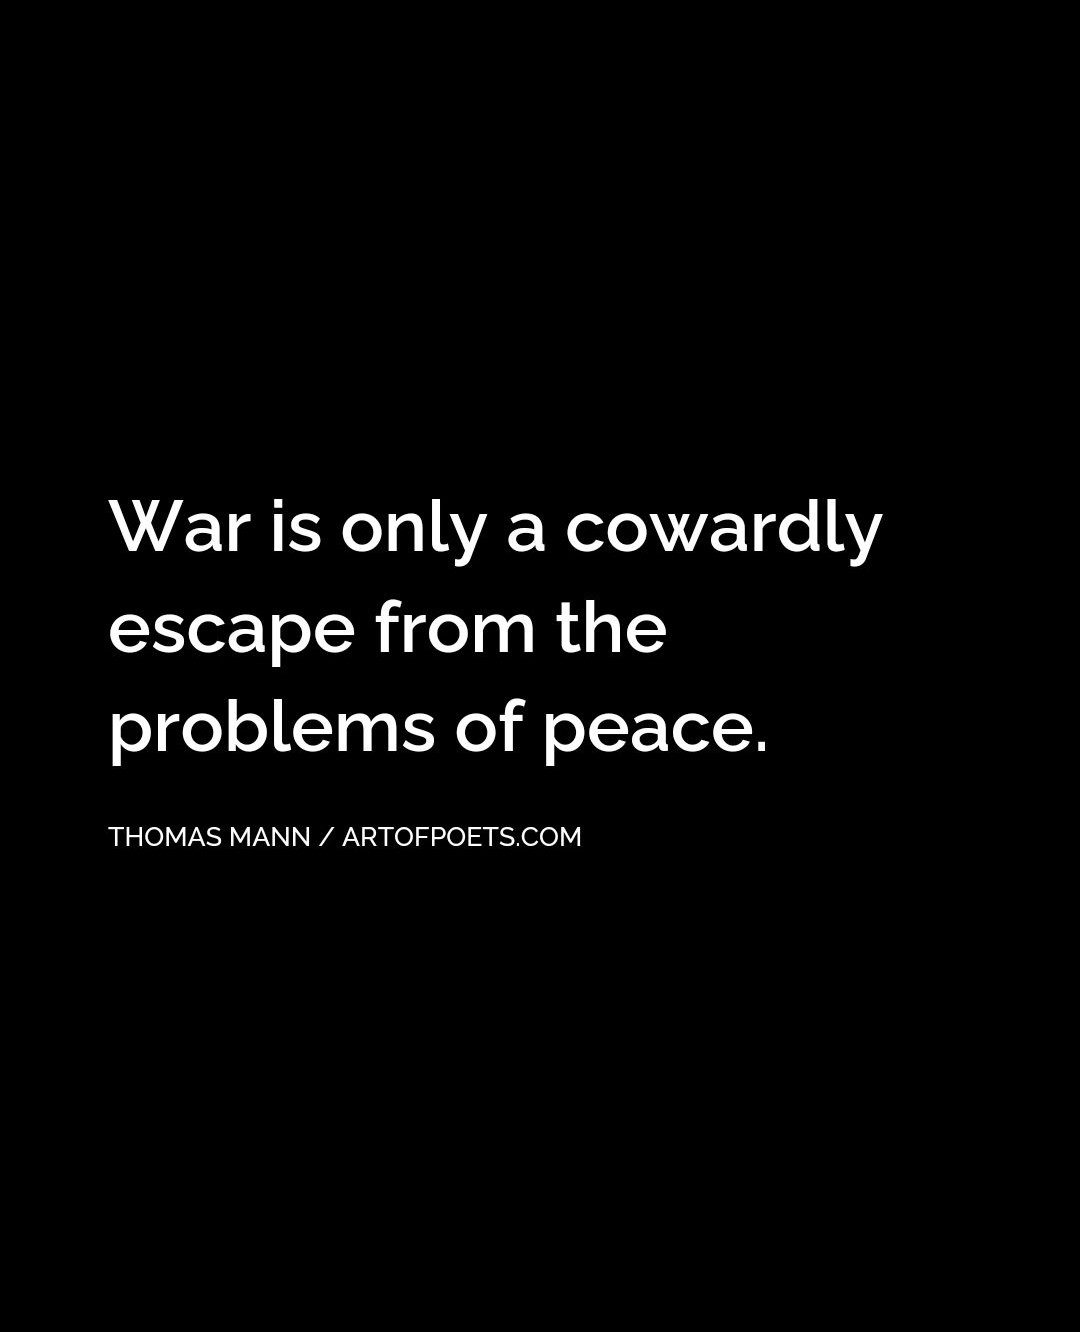 Thomas Mann quote on black background: War is only a cowardly escape from the problems of peace